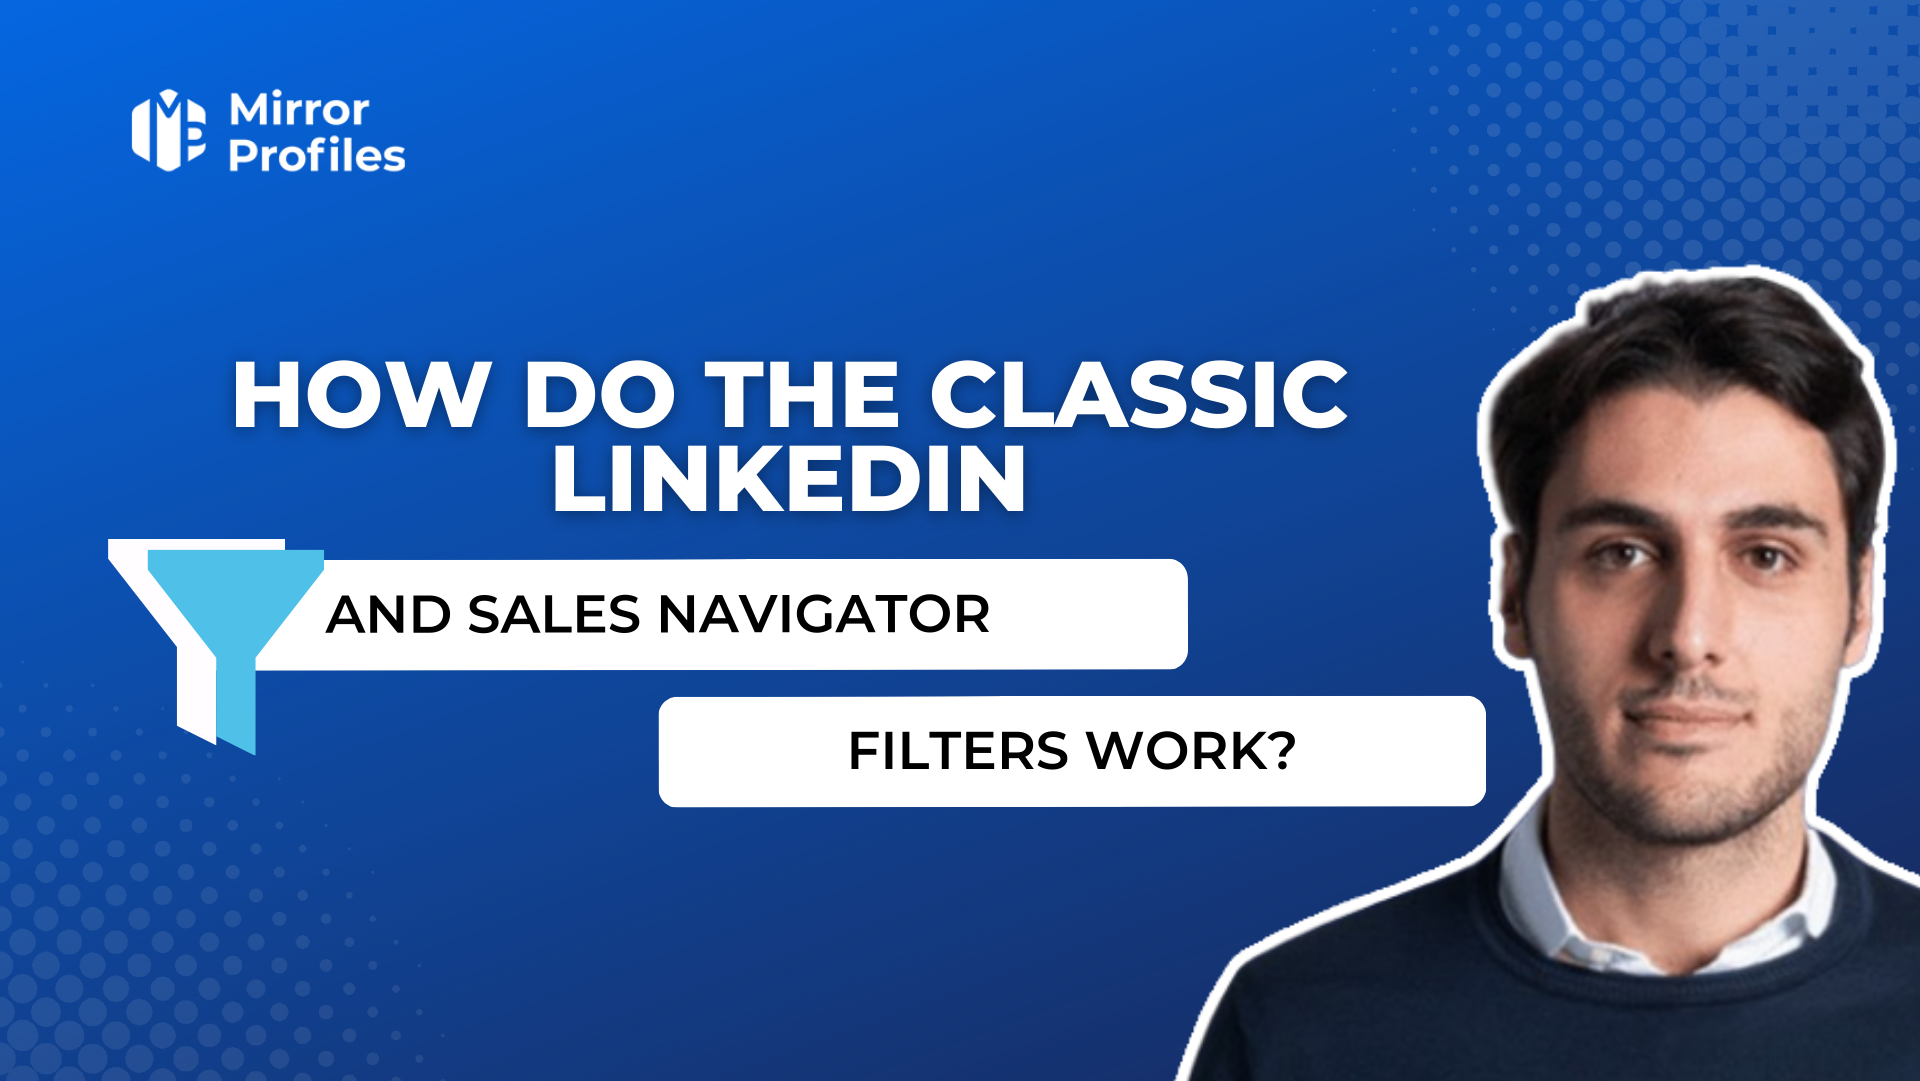 How do the classic linkedin and sales navigator filters work?